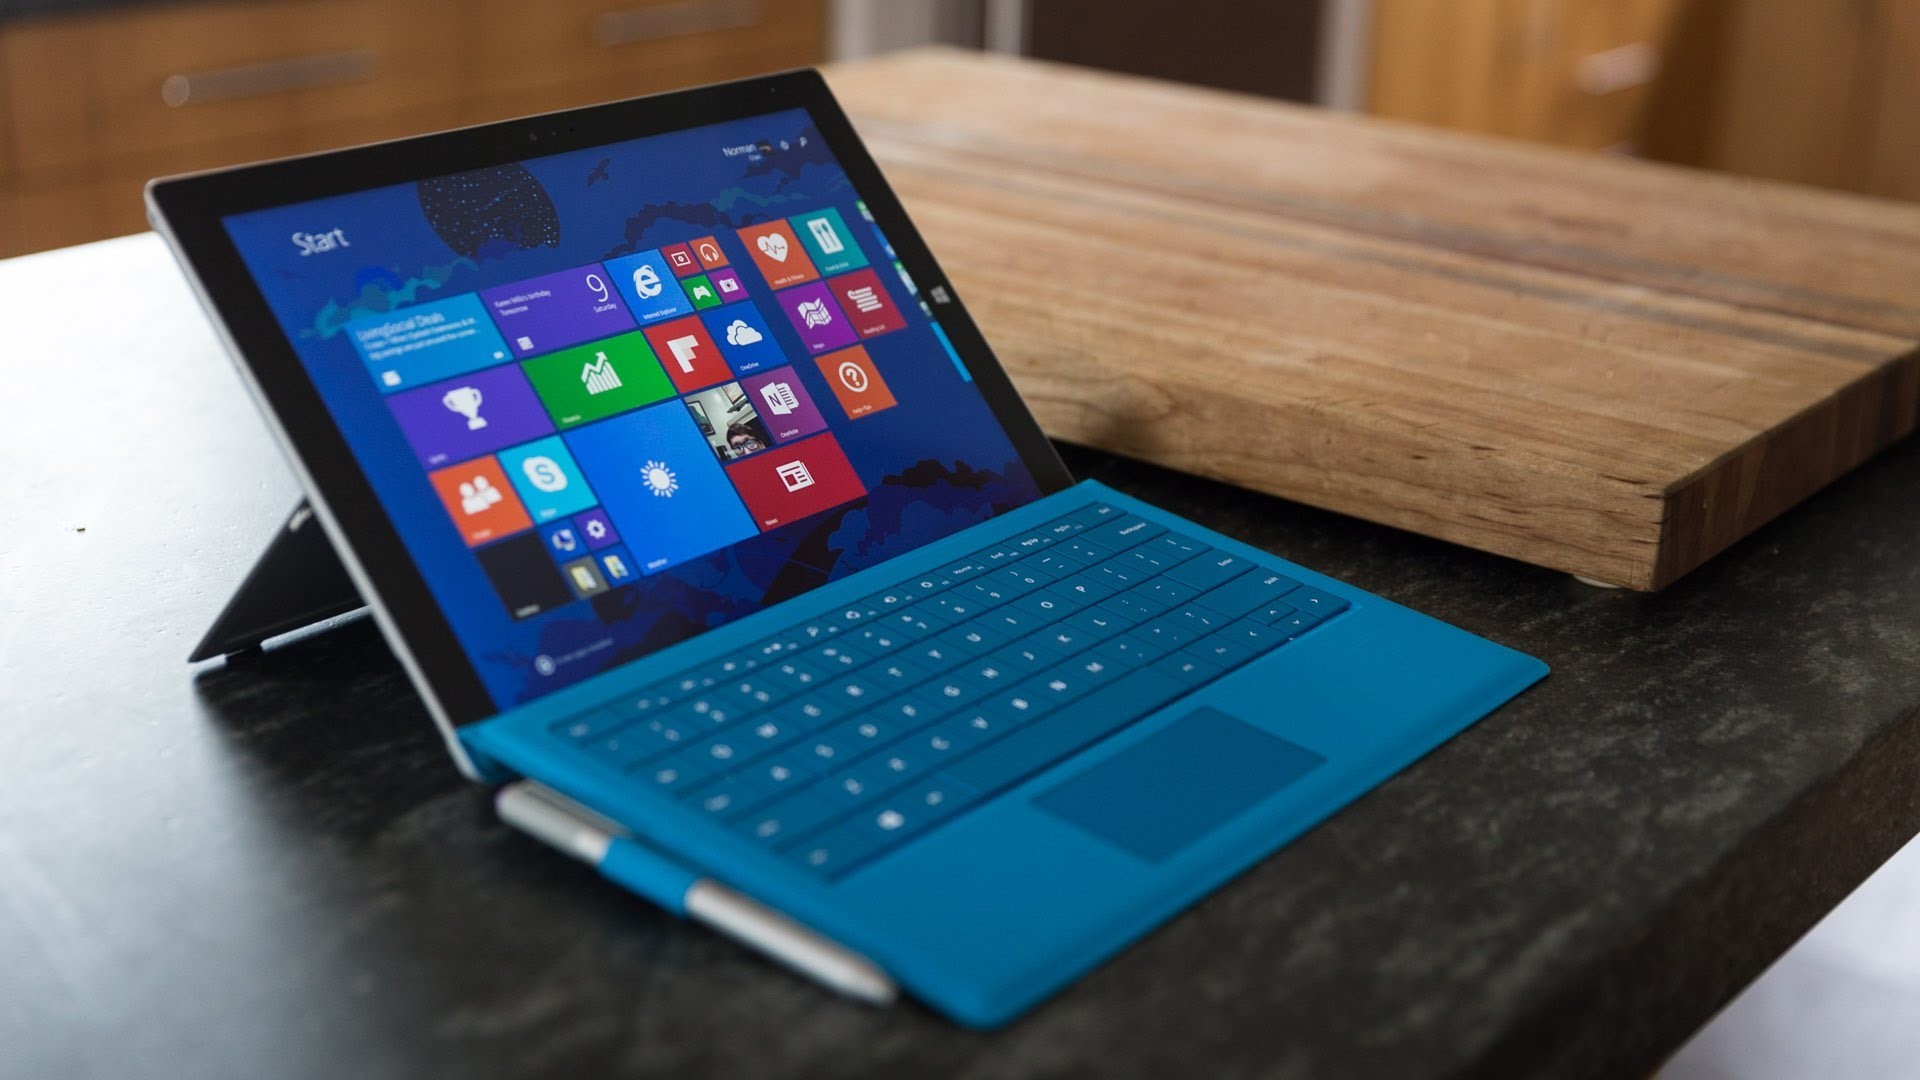 1920x1080 Apple iPad Pro vs. Microsoft Surface Pro 4: Which 2-in-1 device to get?